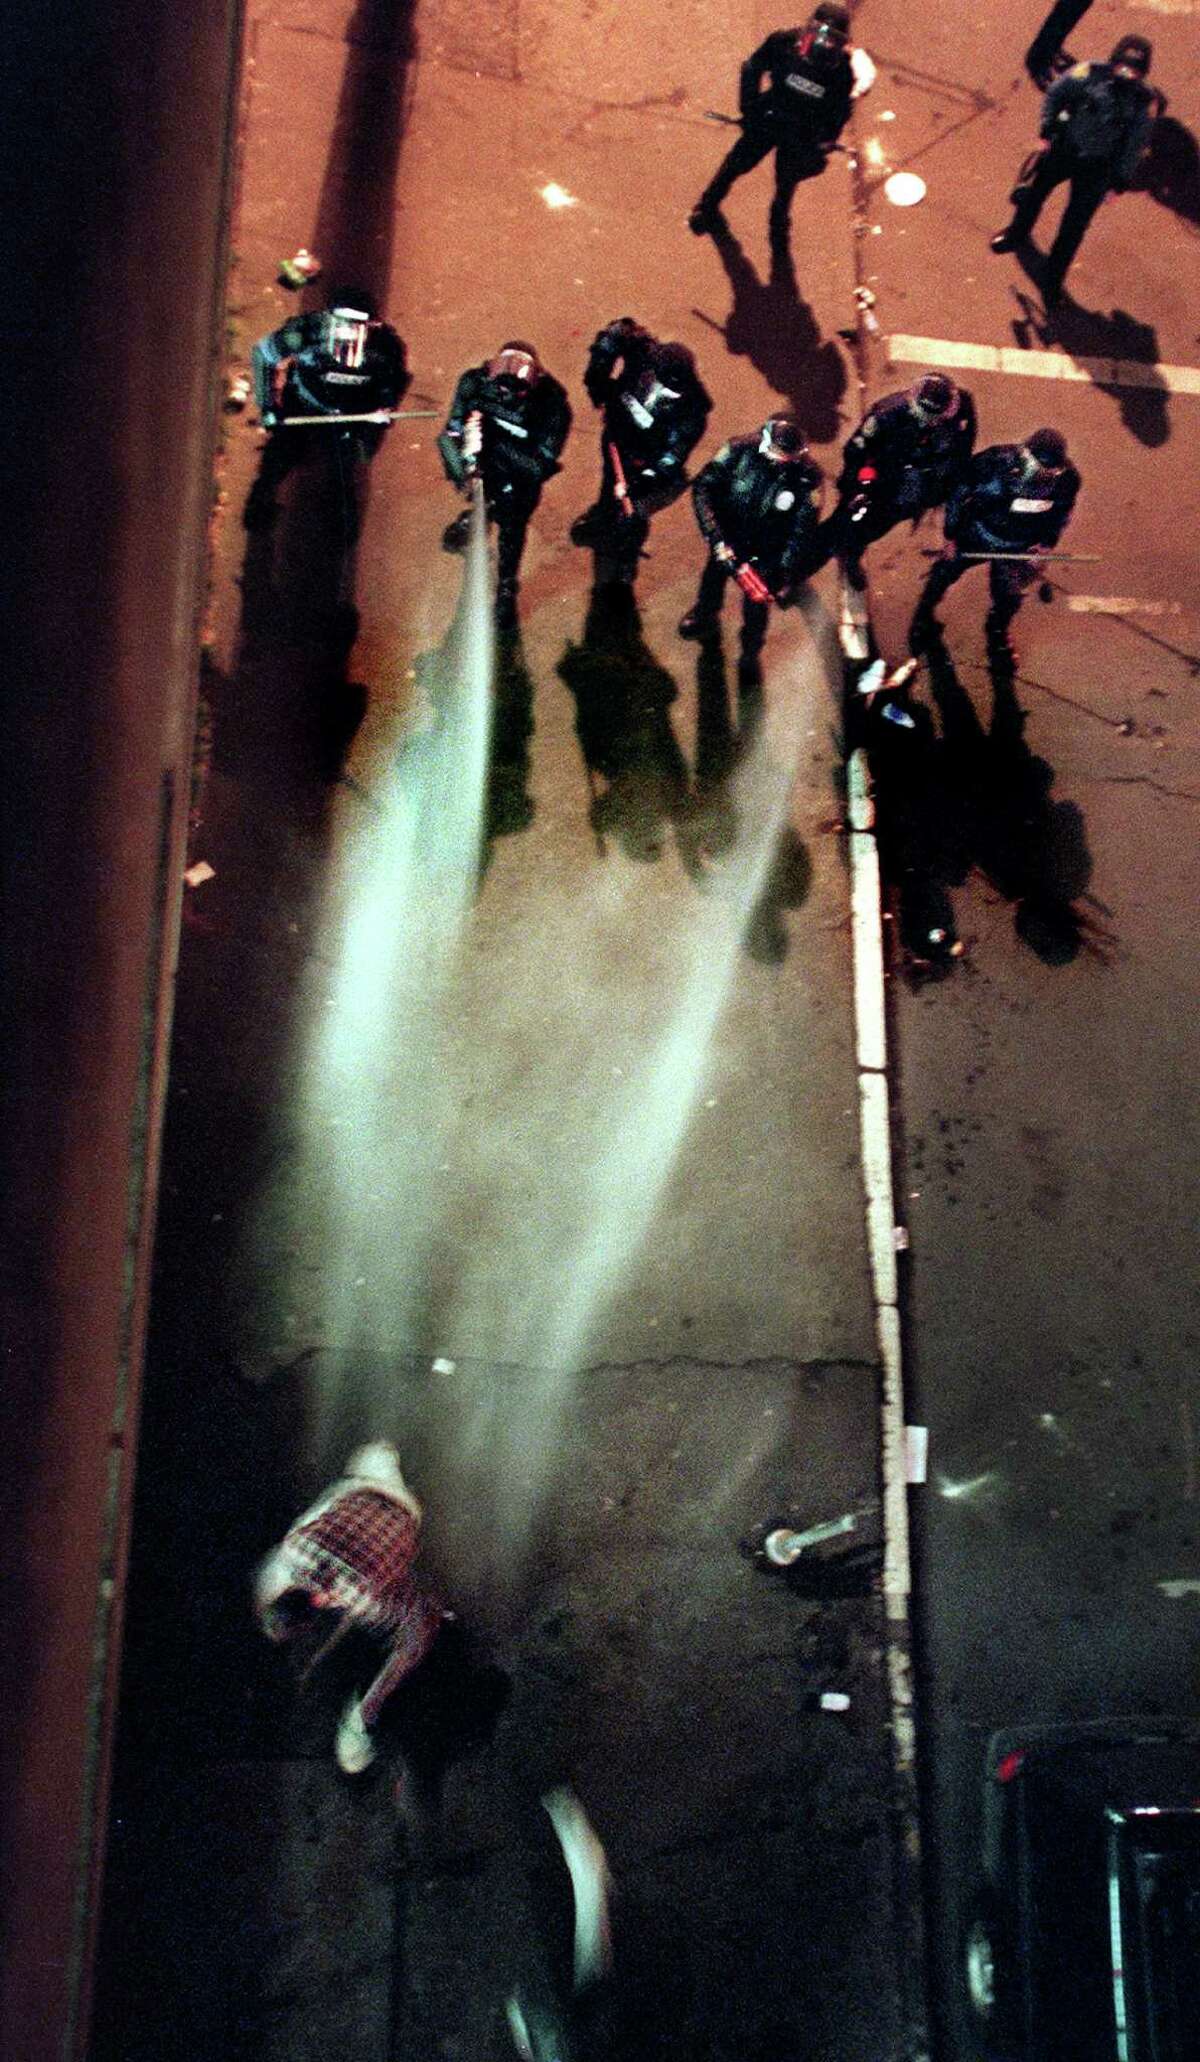 Seattle Police officers gas a man on James street in Seattle while clearing the streets after a Mardi Gras celebration which turned into a protest in Pioneer Square early the morning of Feb. 25, 2001.